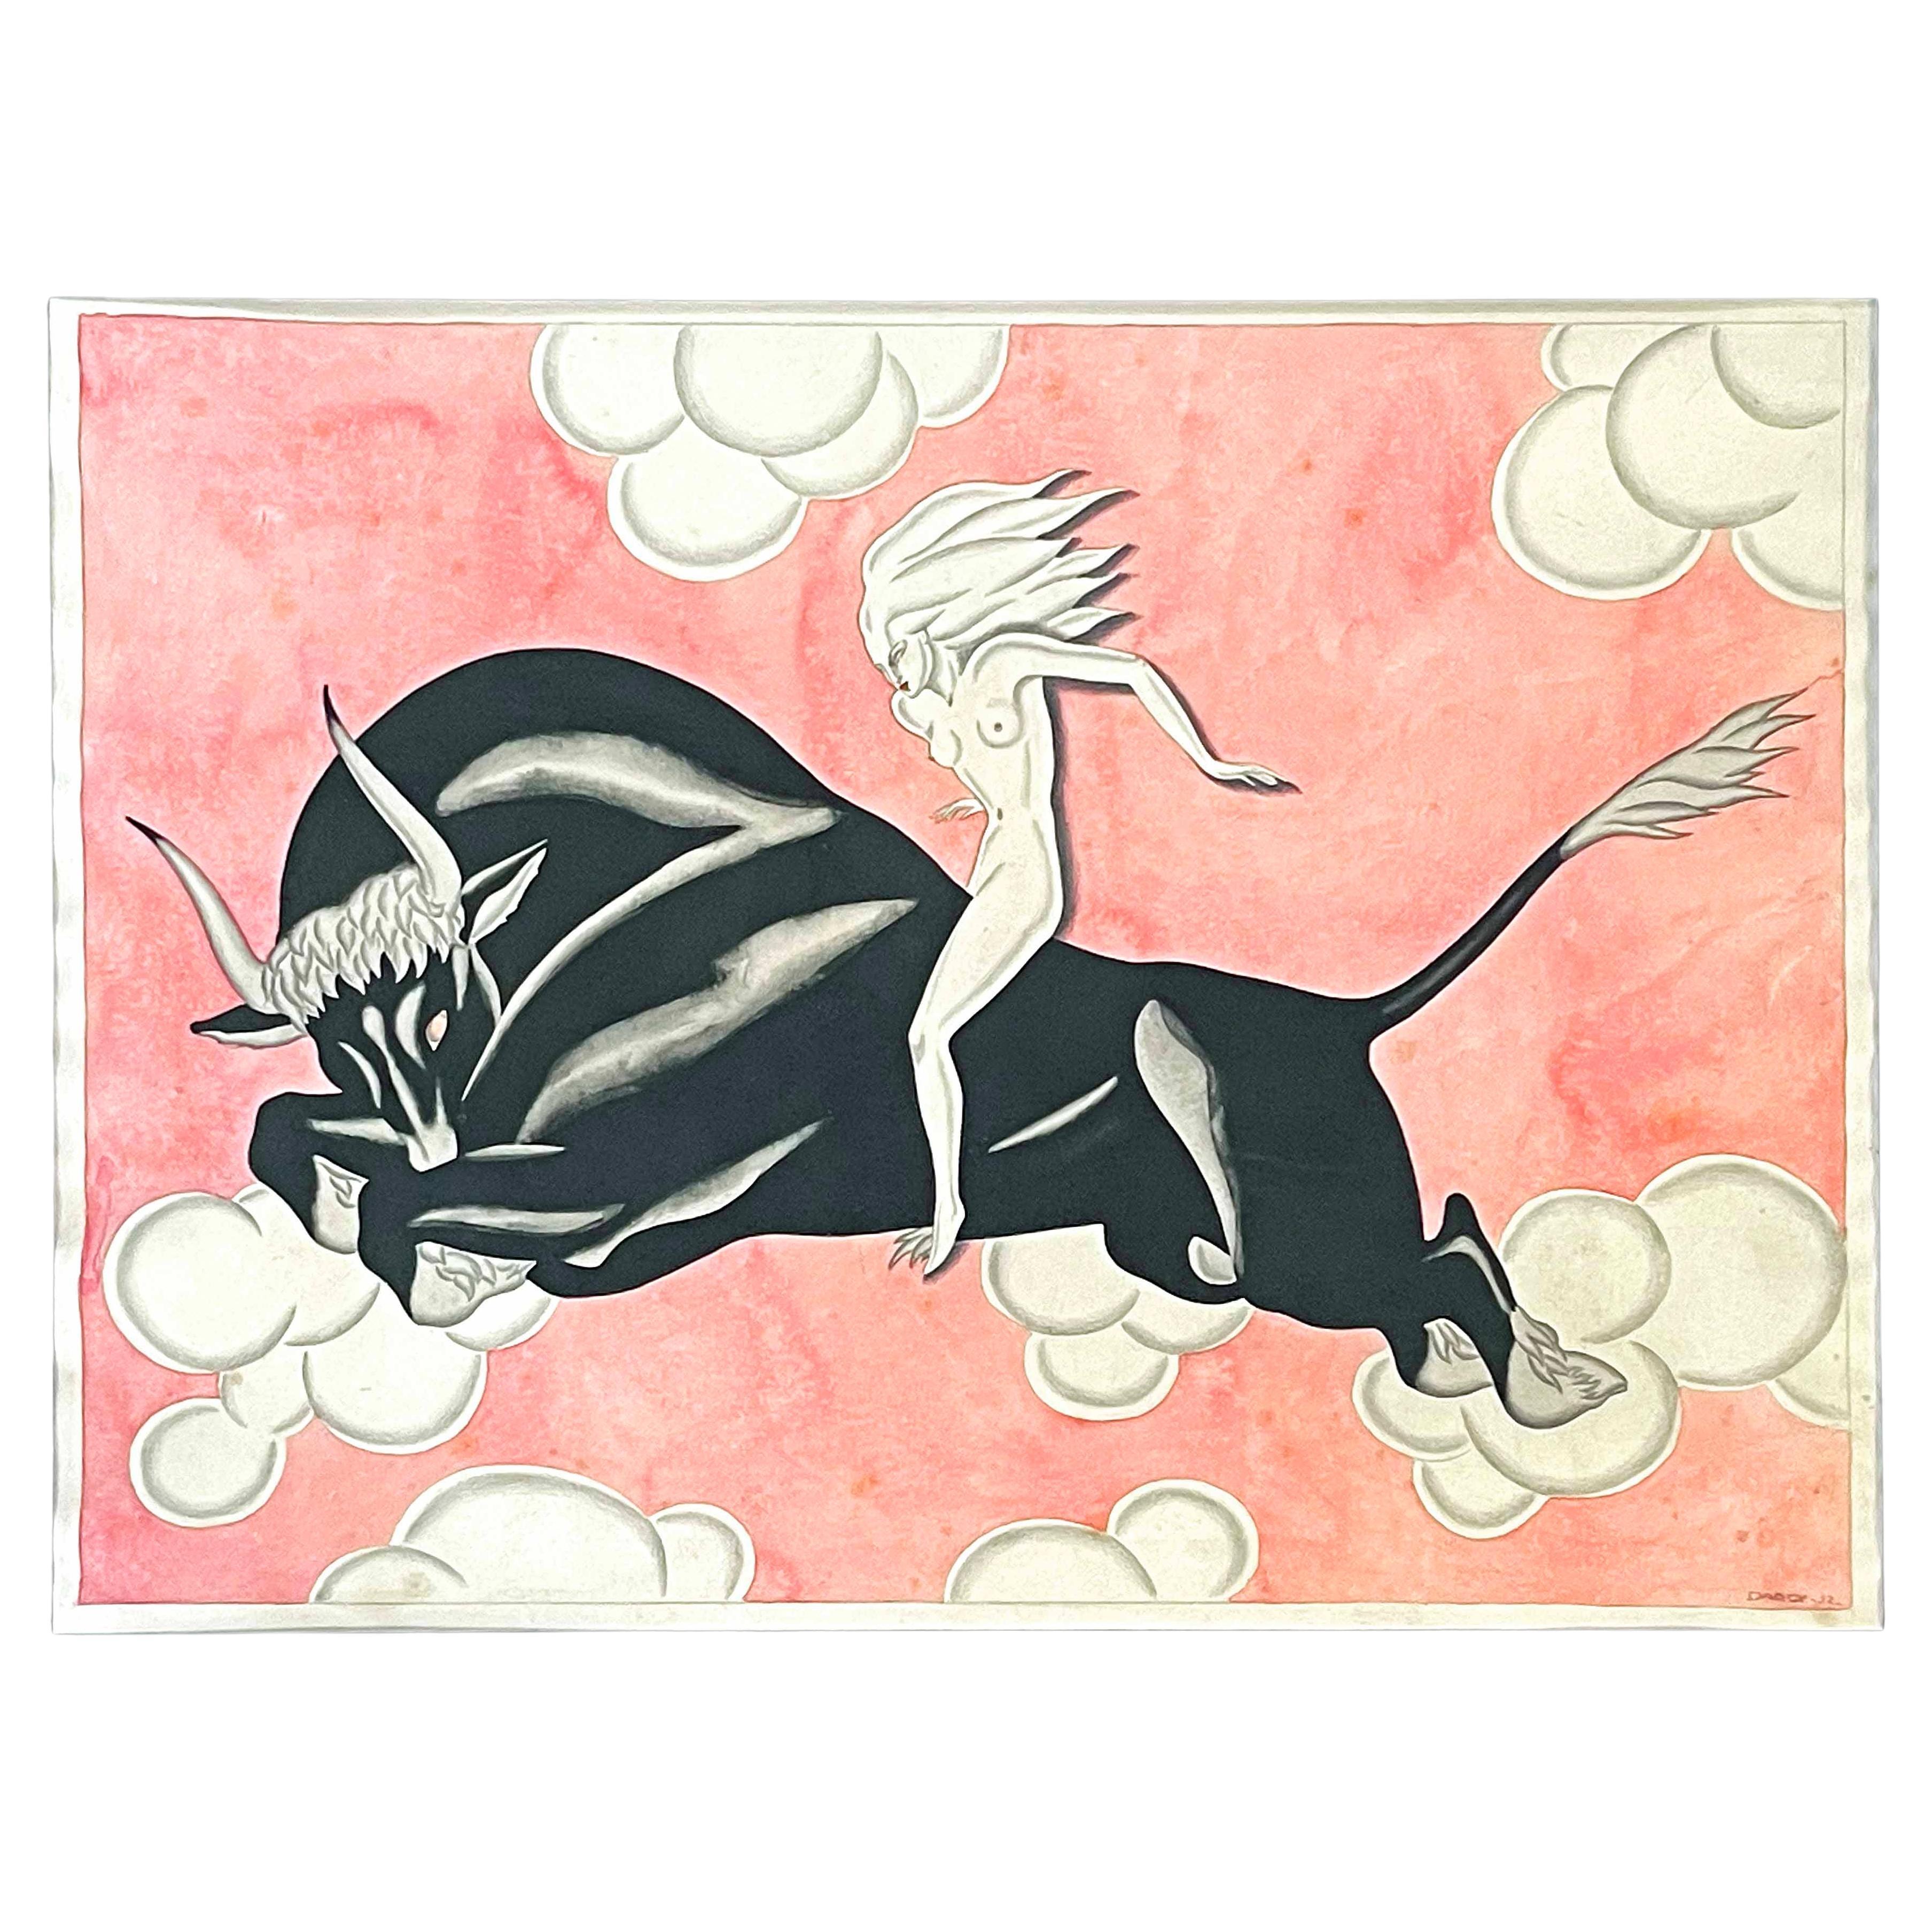 "Europa and the Bull", Bold Art Deco Depiction of Mythological Theme by Darcy